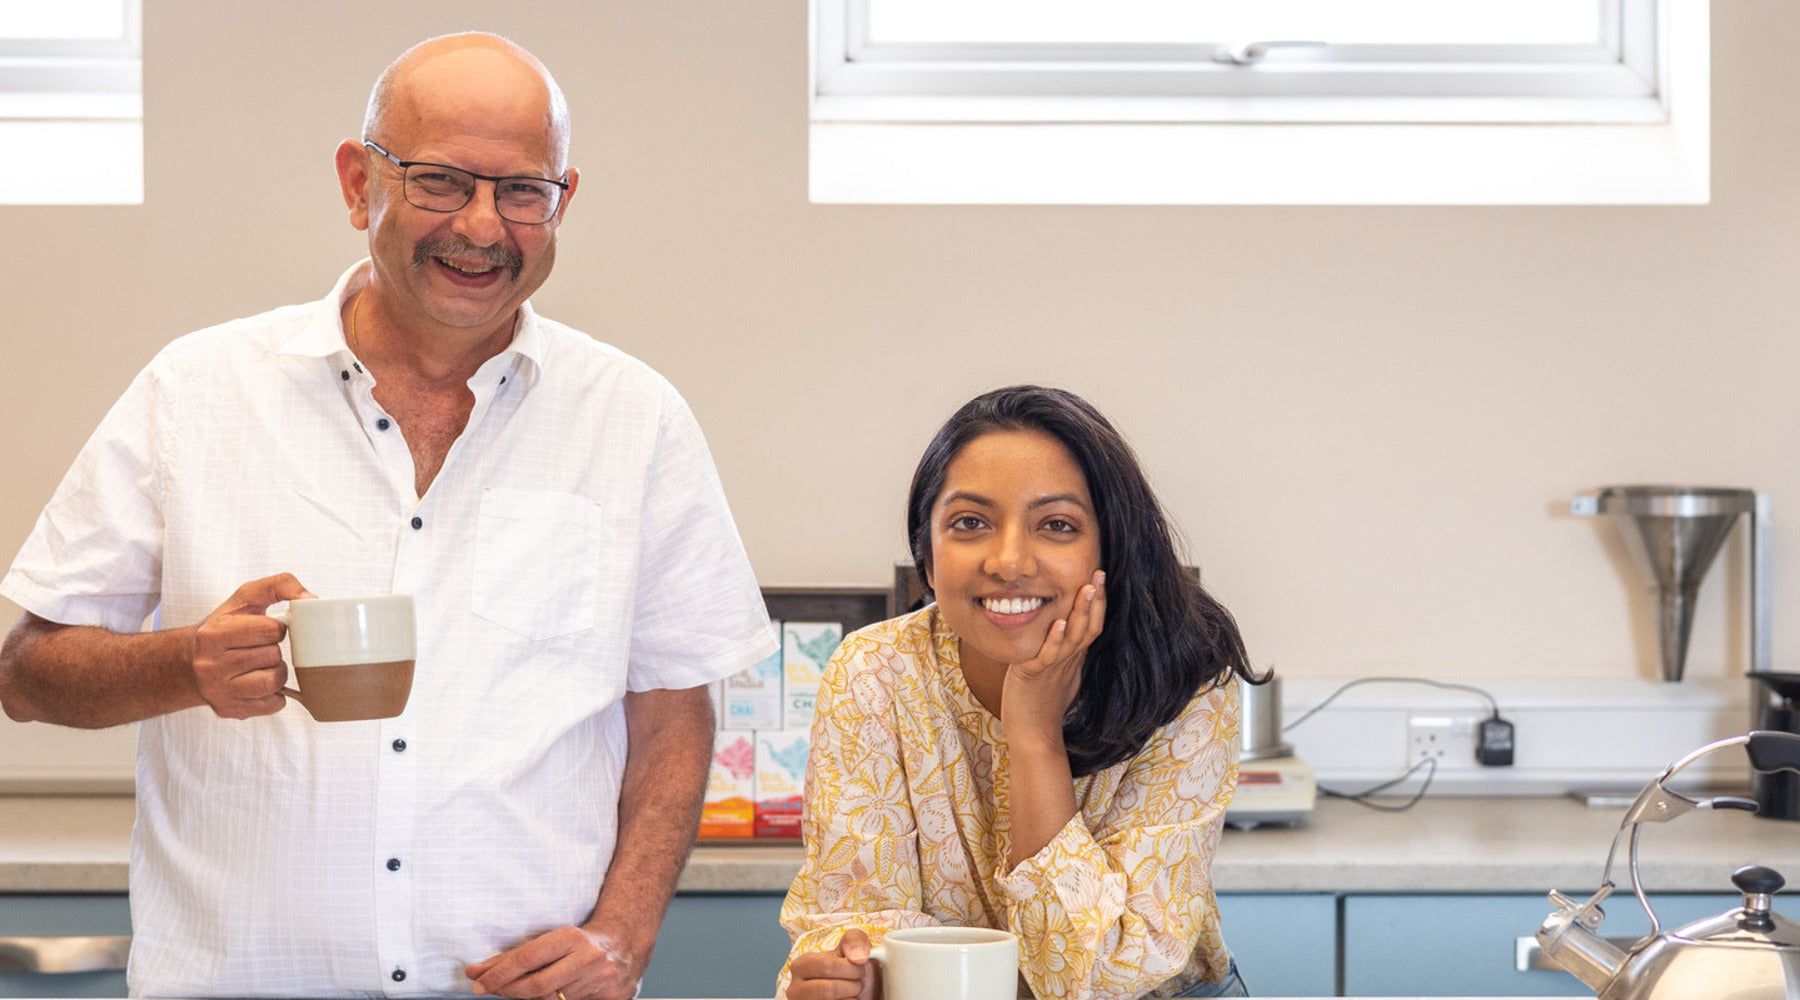 Jimmy our tea blender who is an older south asian man holding a glass mug of Chai with Tina who is a young early 30 year old female of south asian heritage leaning on herleft hand with a big smile. 